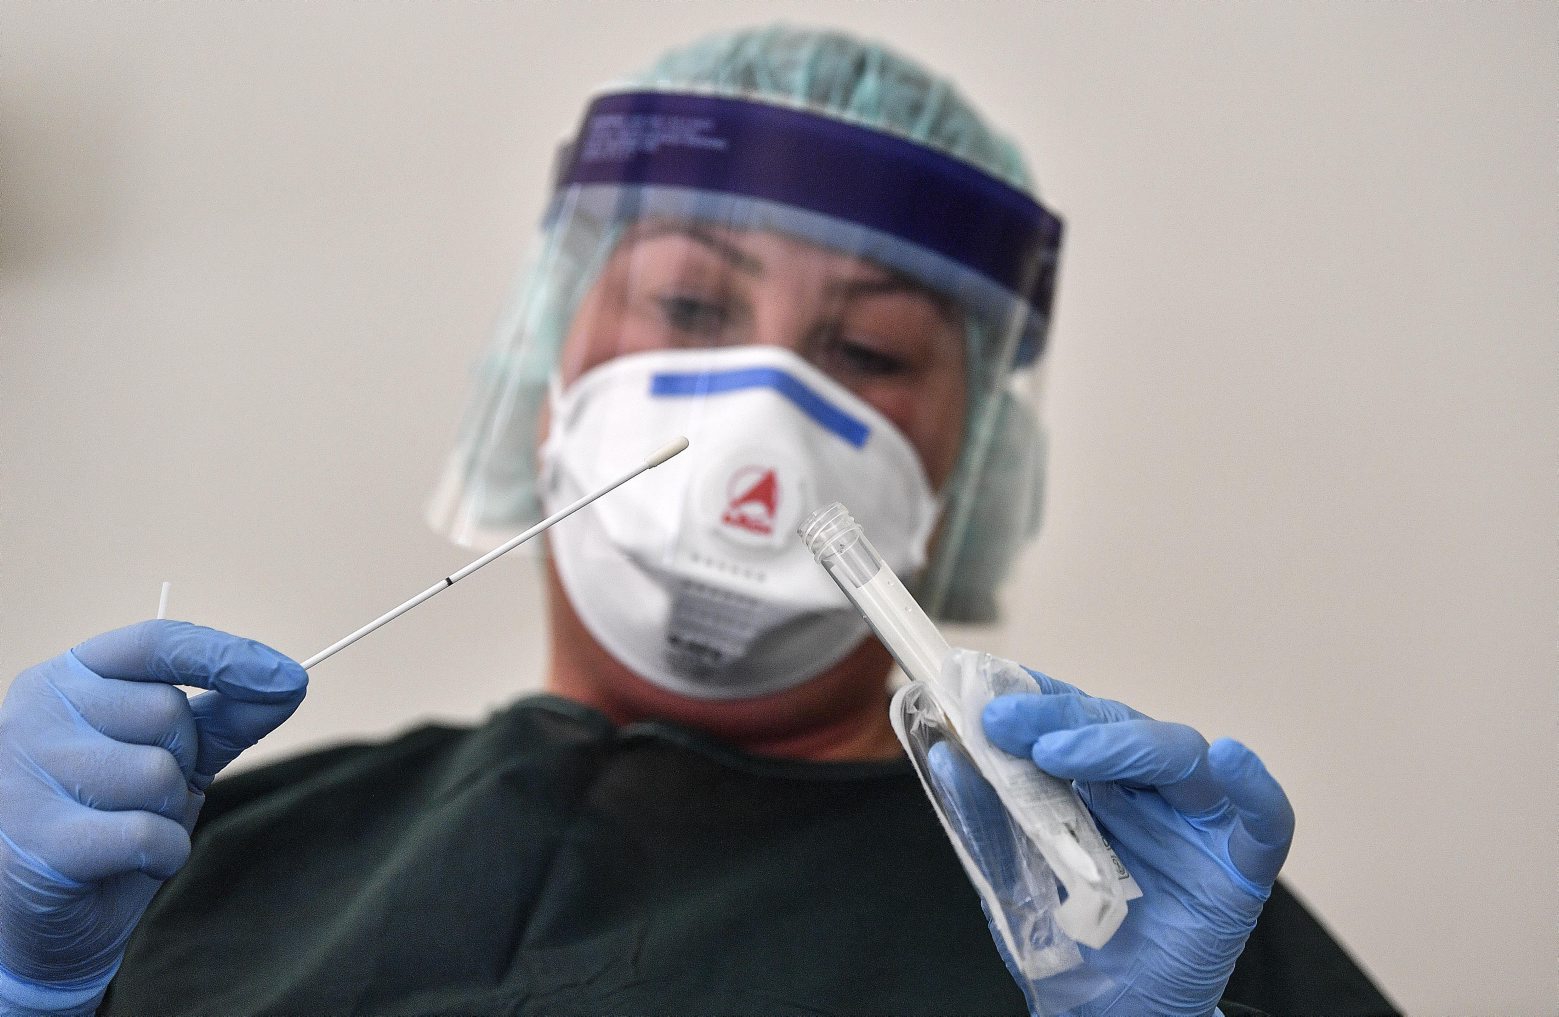 A nurse demonstrates taking a sample for a coronavirus test at the infection station of the university hospital in Essen, Germany, Thursday, March 12, 2020. The vast majority of people recover from the new coronavirus. According to the World Health Organization, most people recover in about two to six weeks, depending on the severity of the illness. (AP Photo/Martin Meissner) Germany Virus Outbreak